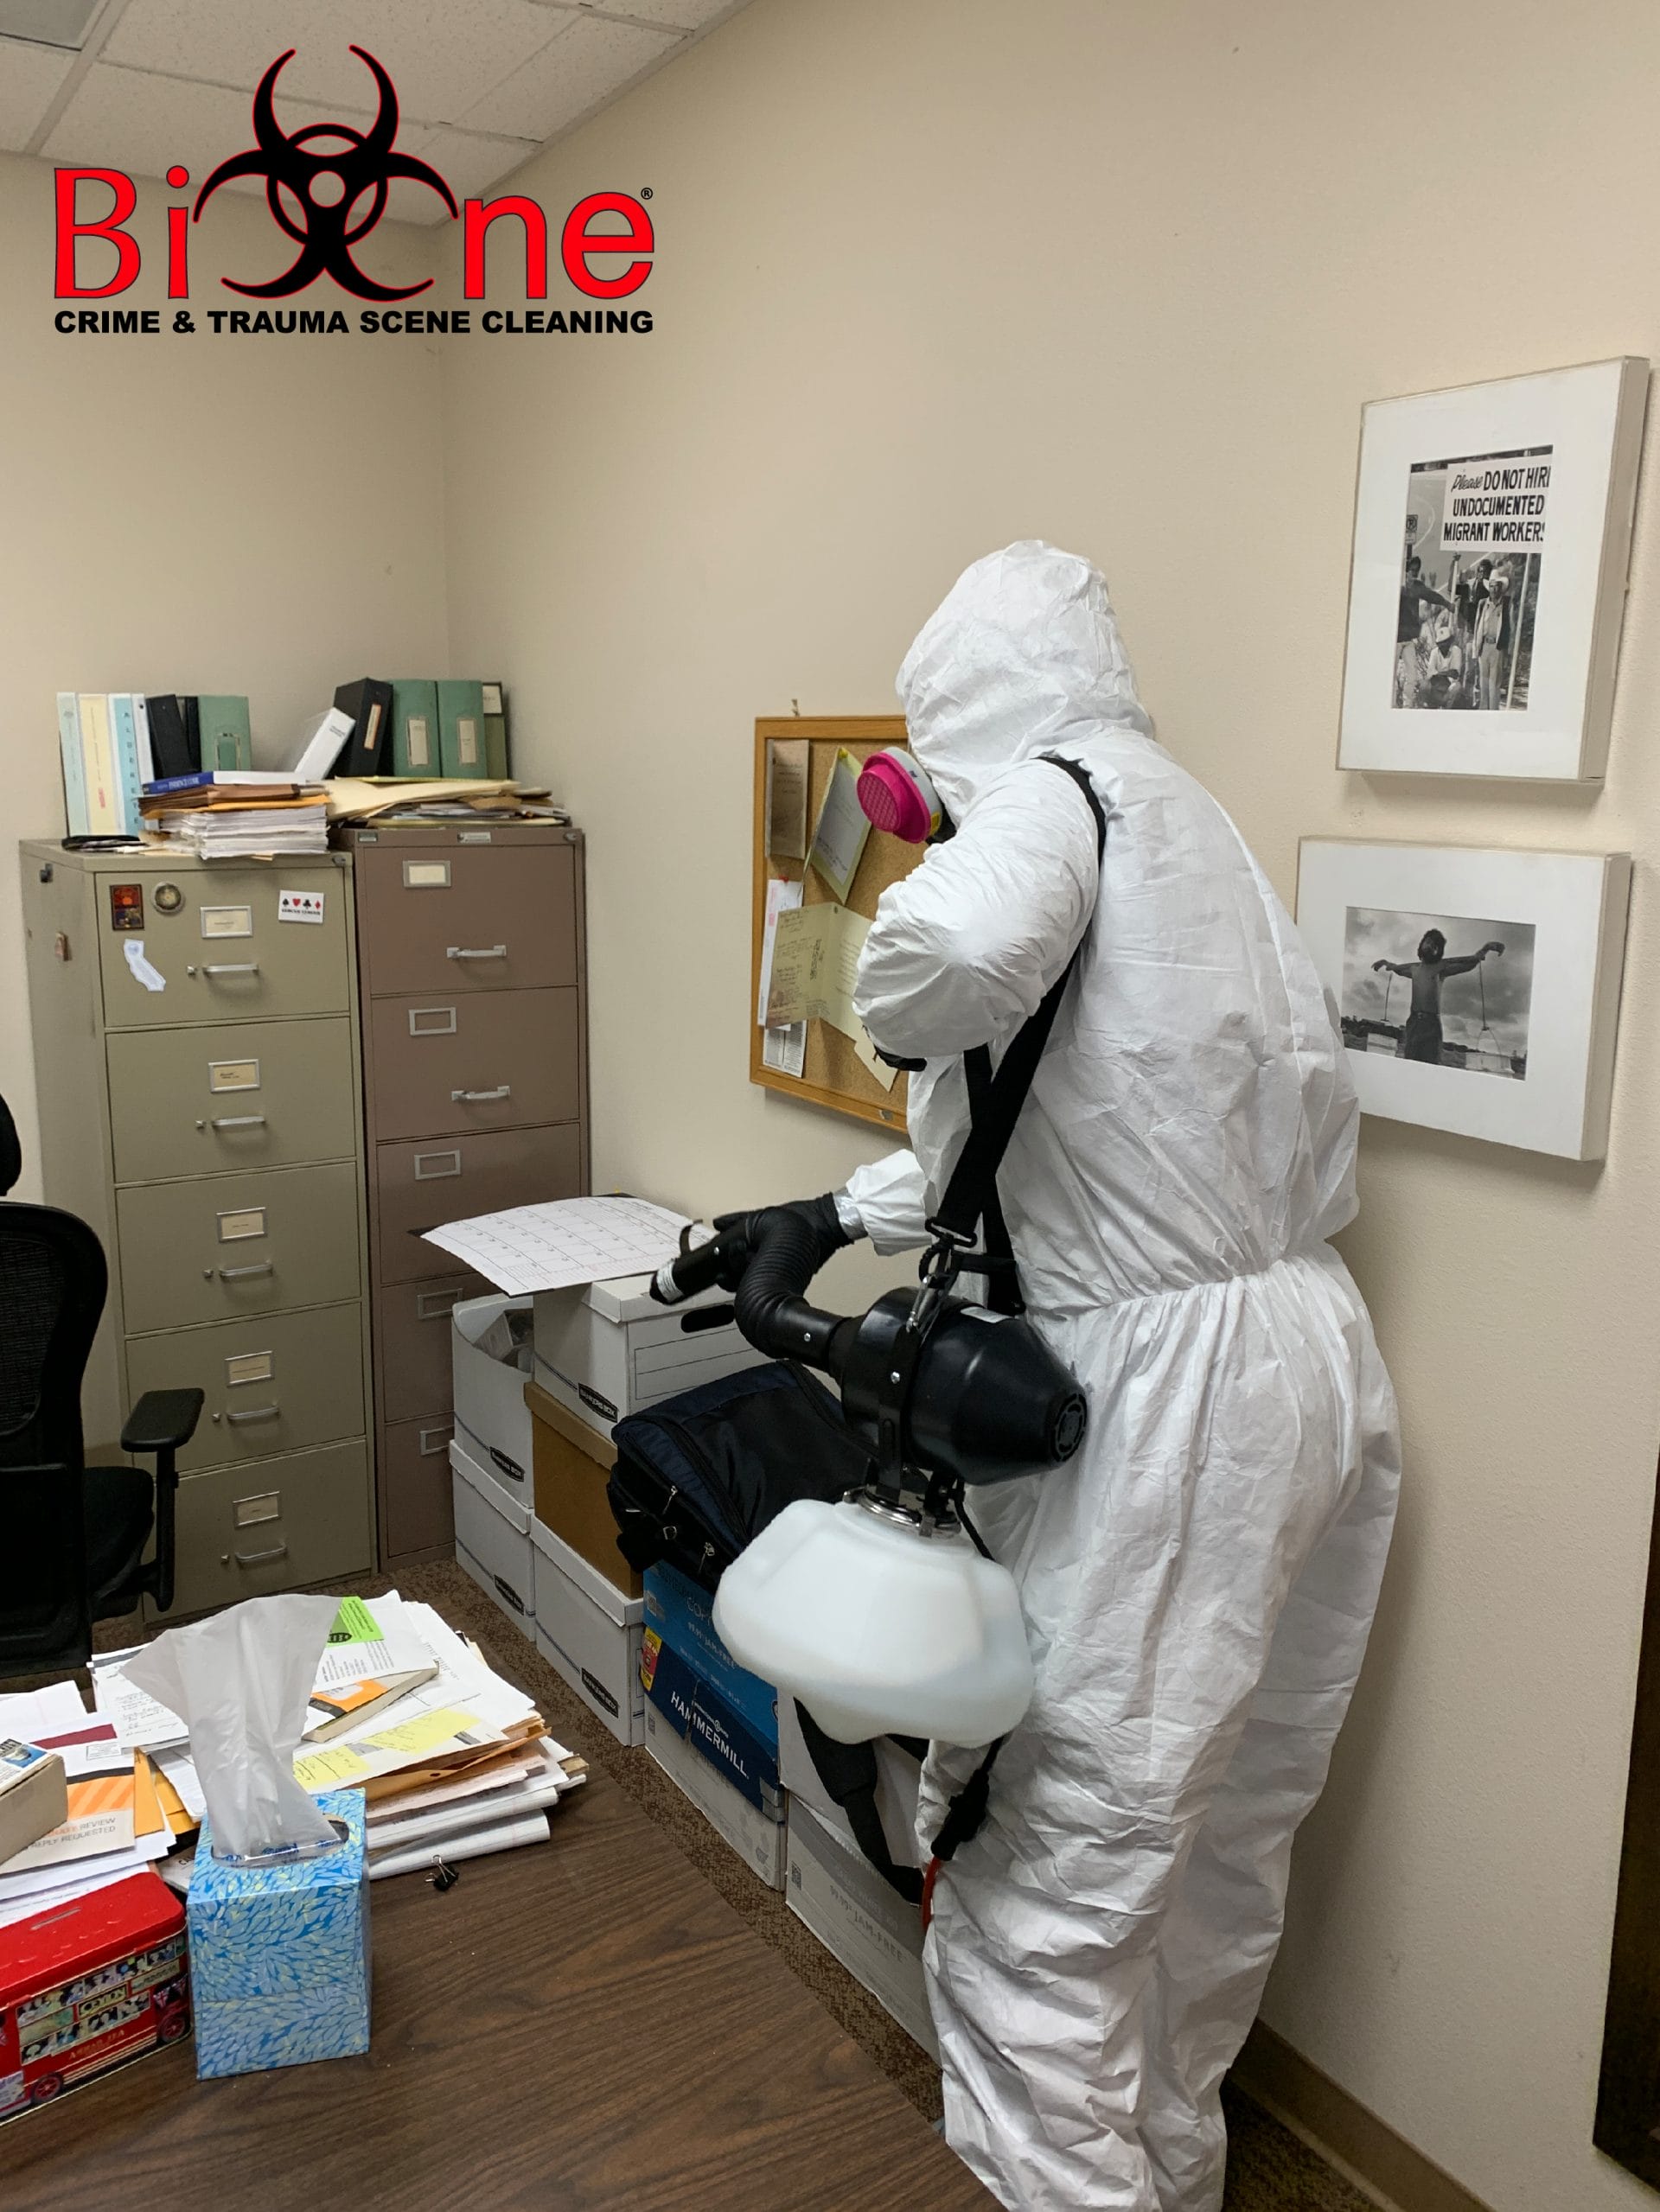 Our certified technicians at Bio-One of Orange work with residential and commercial properties to provide COVID-19 cleaning and disinfection services throughout Orange County and surrounding communities.